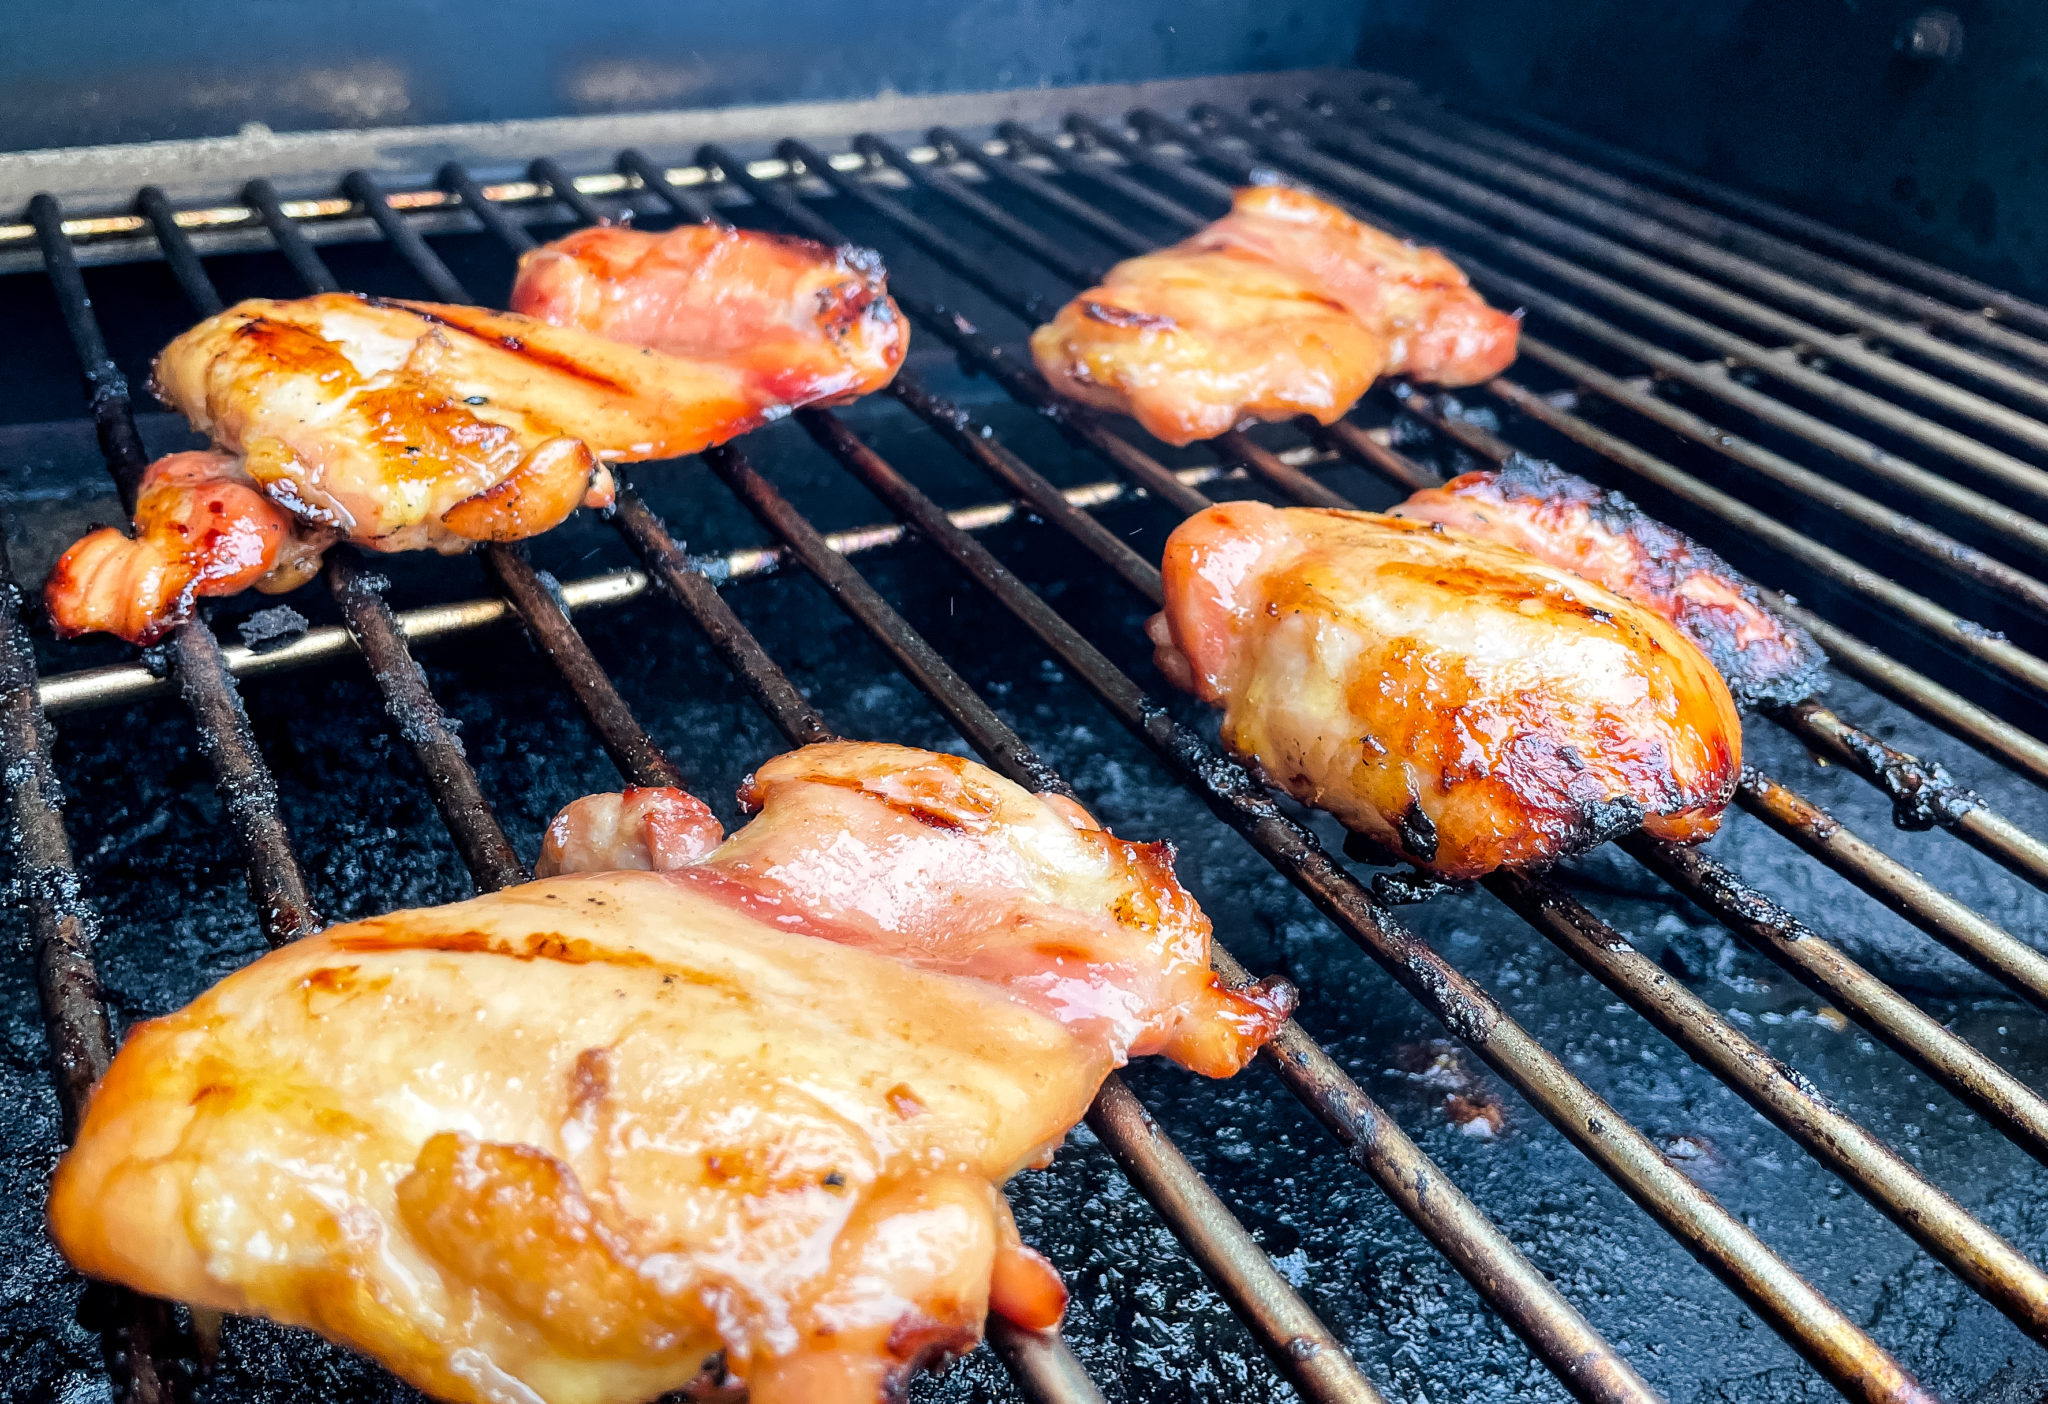 Cooking Chicken On Pellet Grill